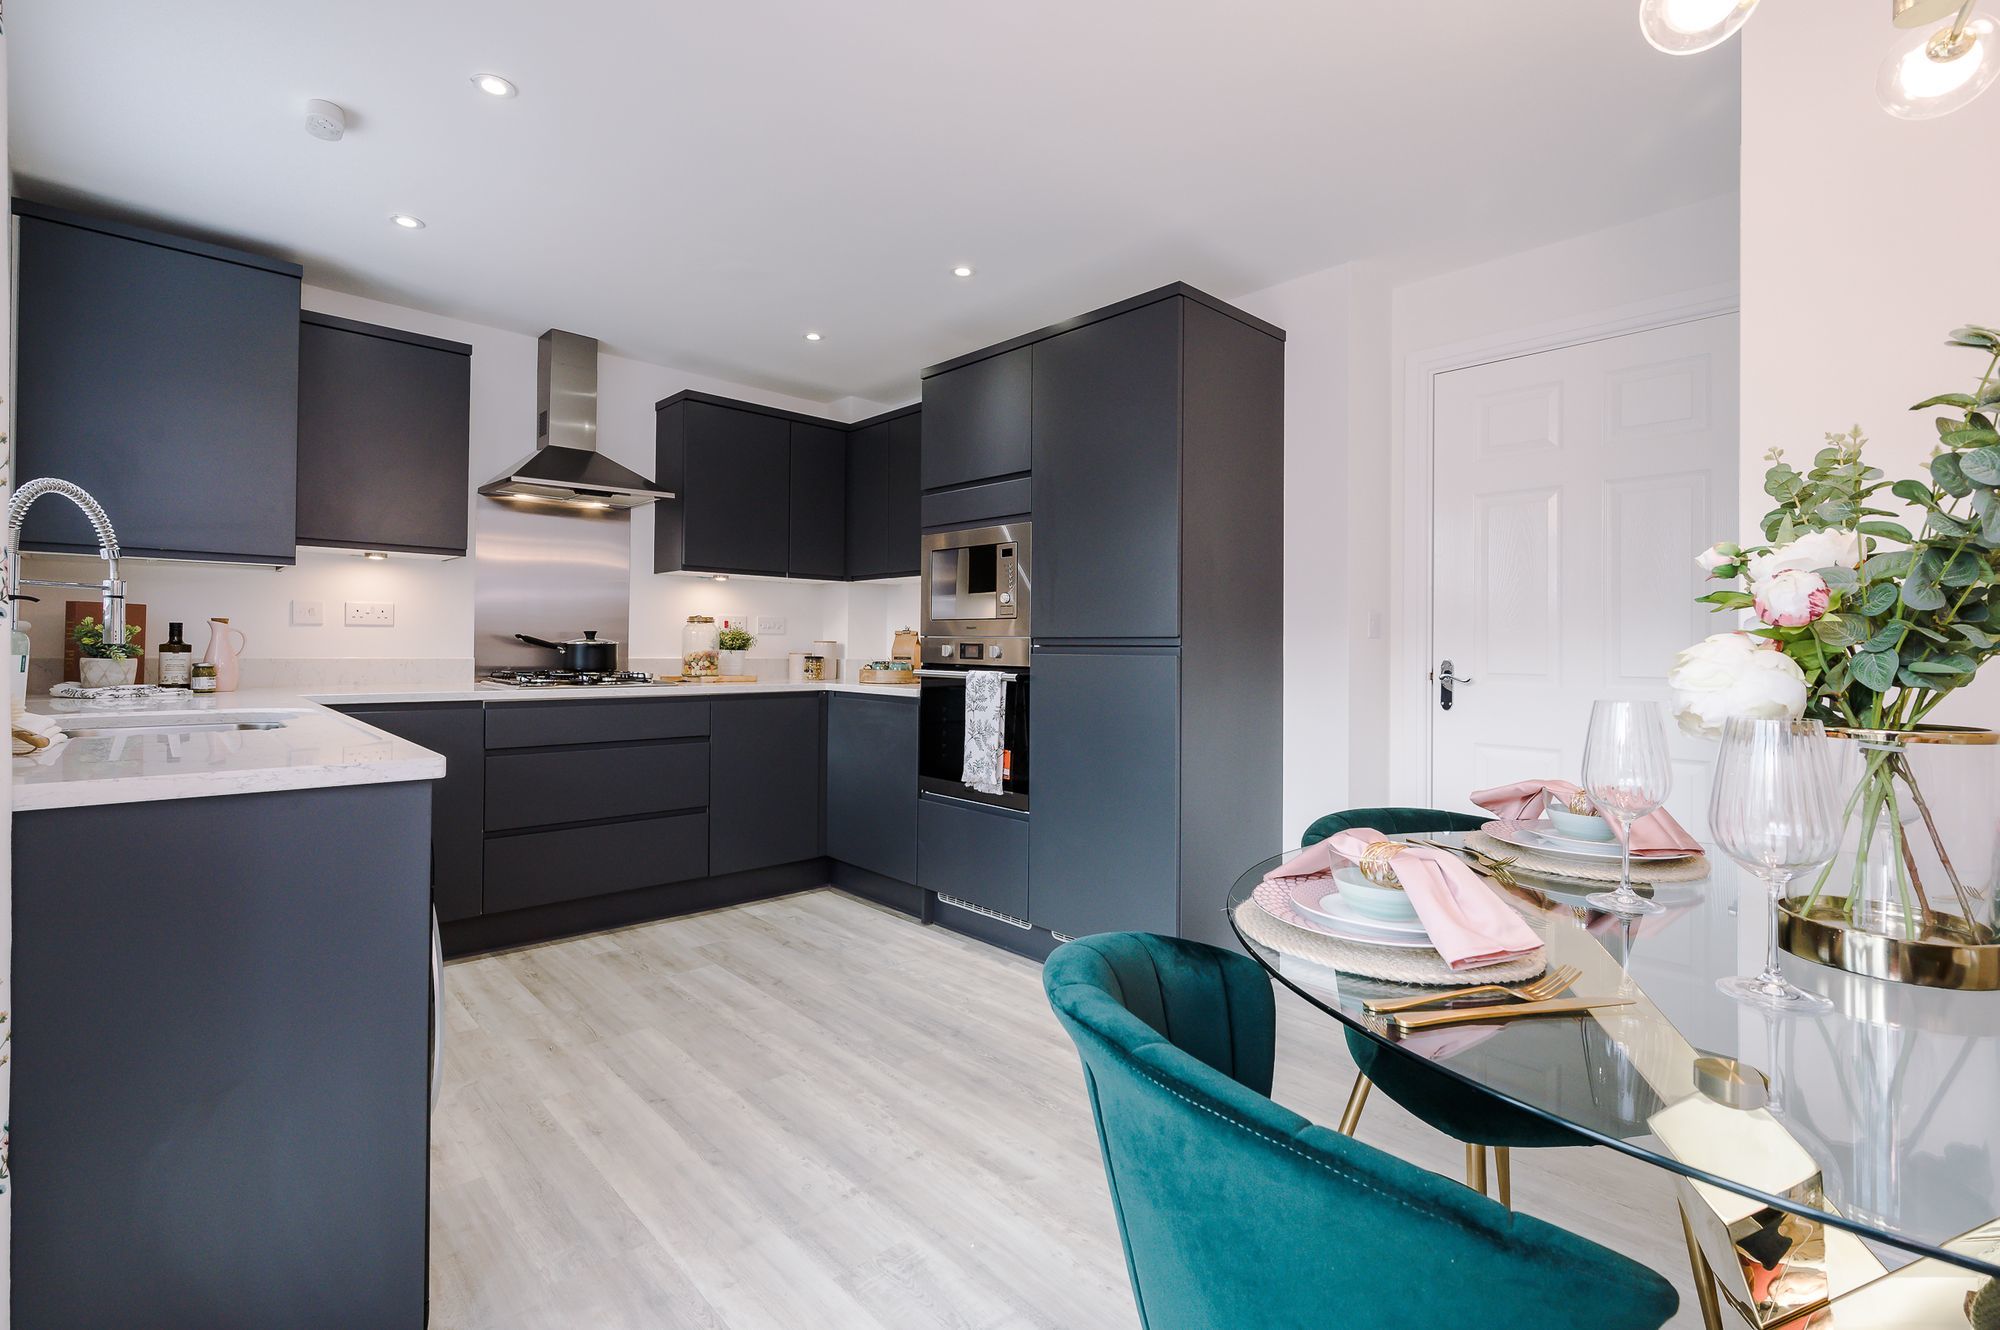 An example of the kitchen in the new Elan homes at The Hyde, Kinver